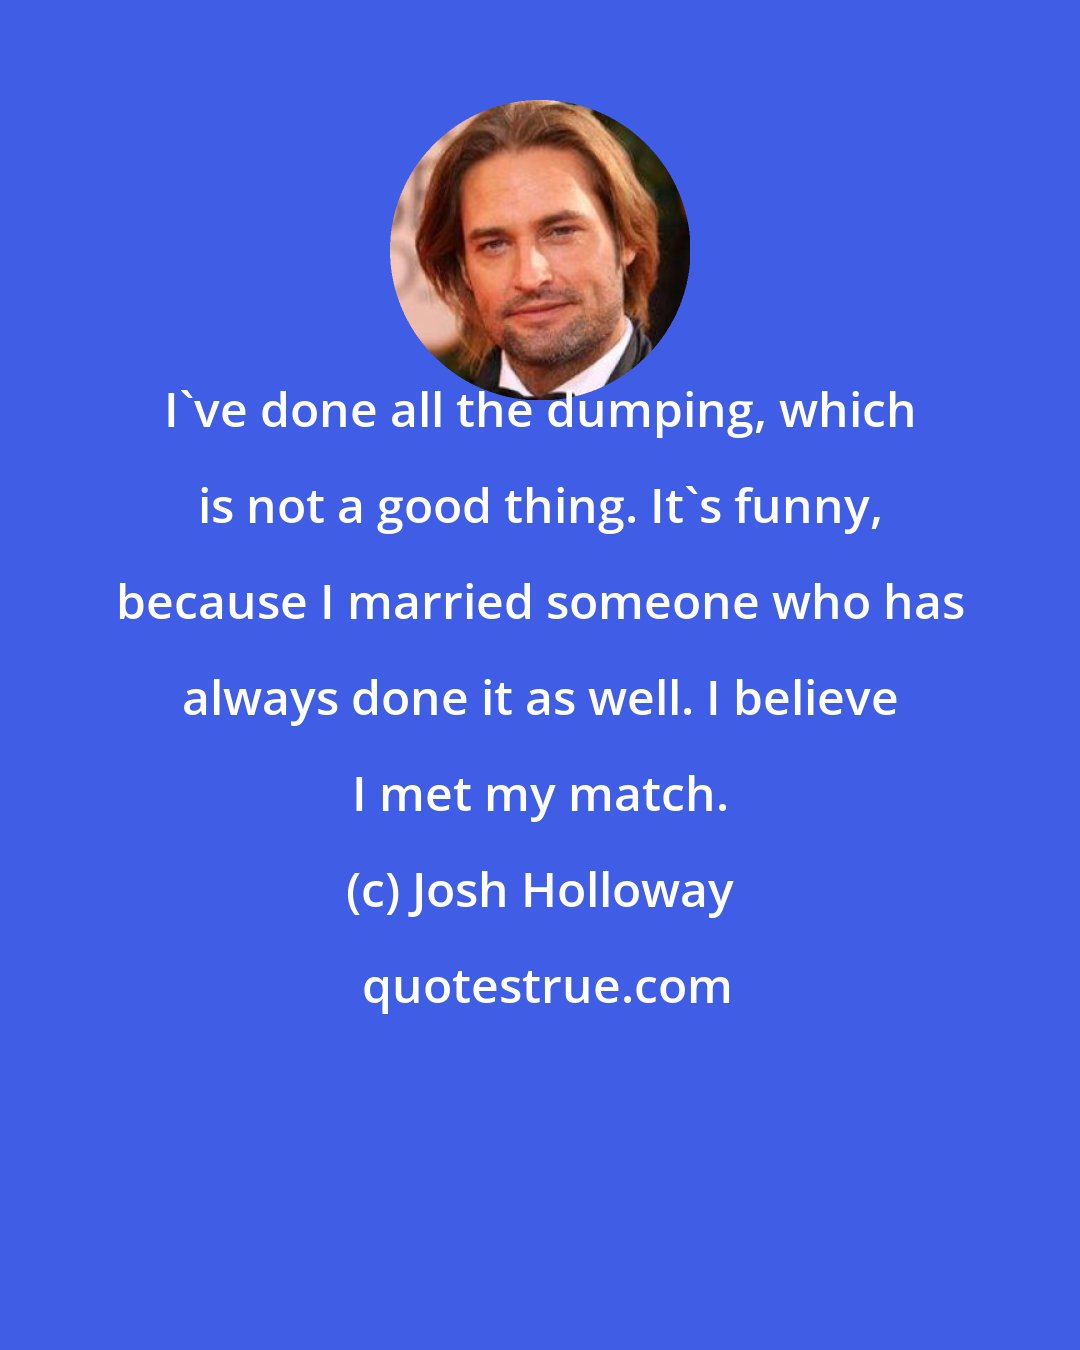 Josh Holloway: I've done all the dumping, which is not a good thing. It's funny, because I married someone who has always done it as well. I believe I met my match.